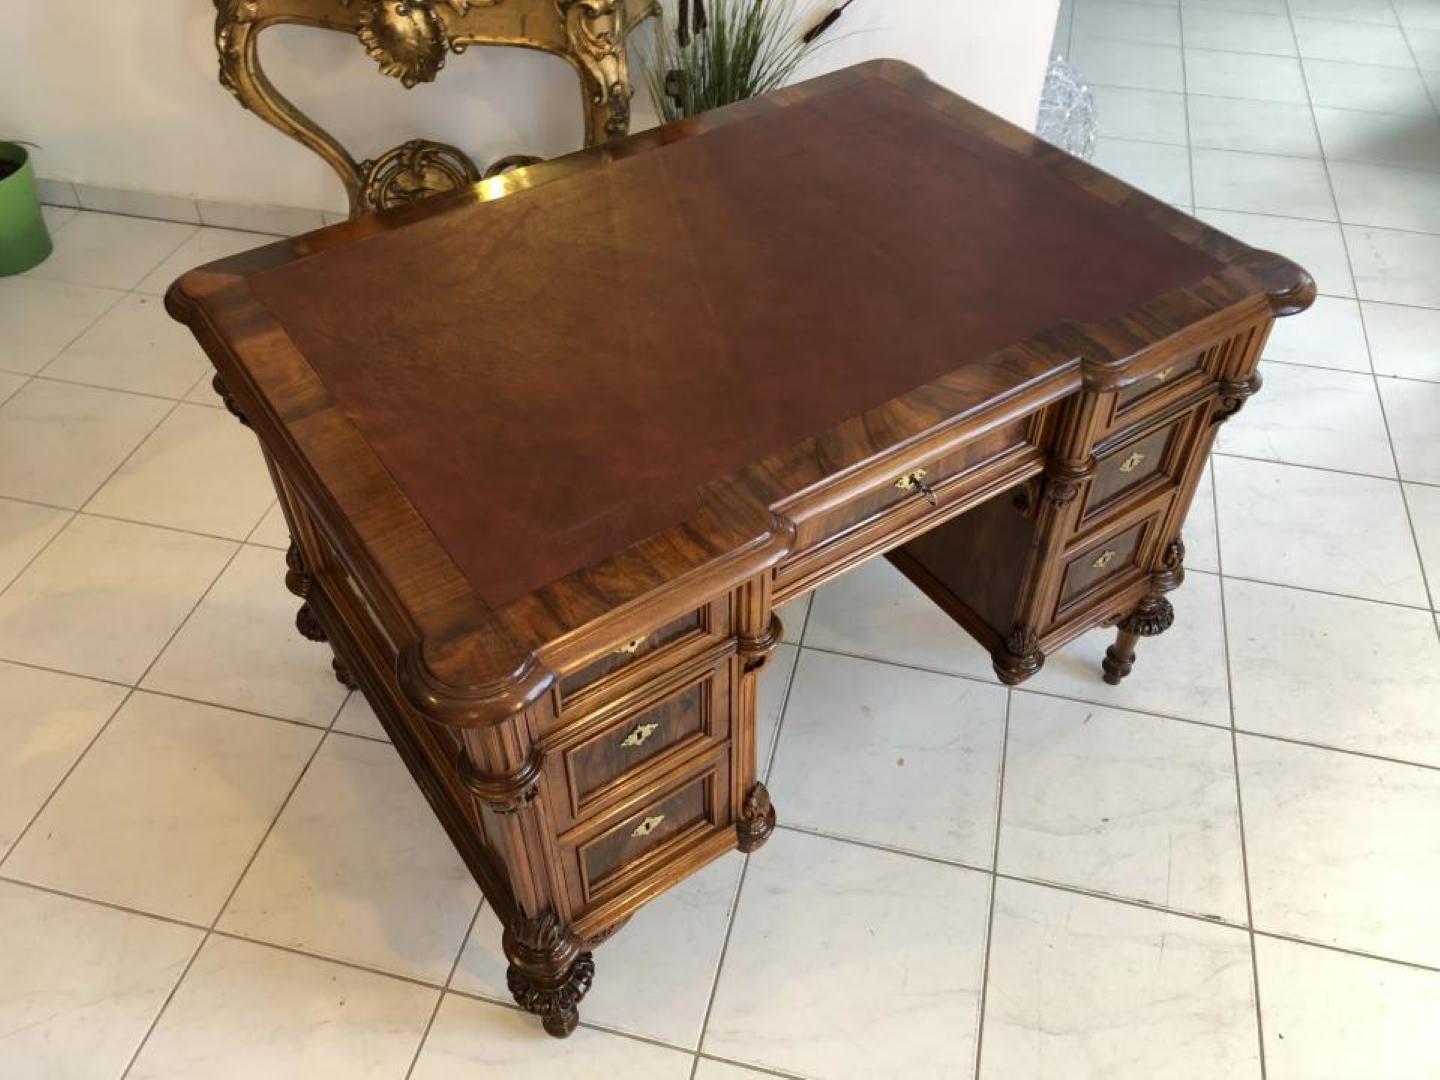 Elaborately crafted small men's desk from the Gründerzeit period.
This is a beautiful restored secretary from the time of historicism, made circa 1885.
An eyecatcher in your study / office, equipped with seven smooth and lockable drawers with